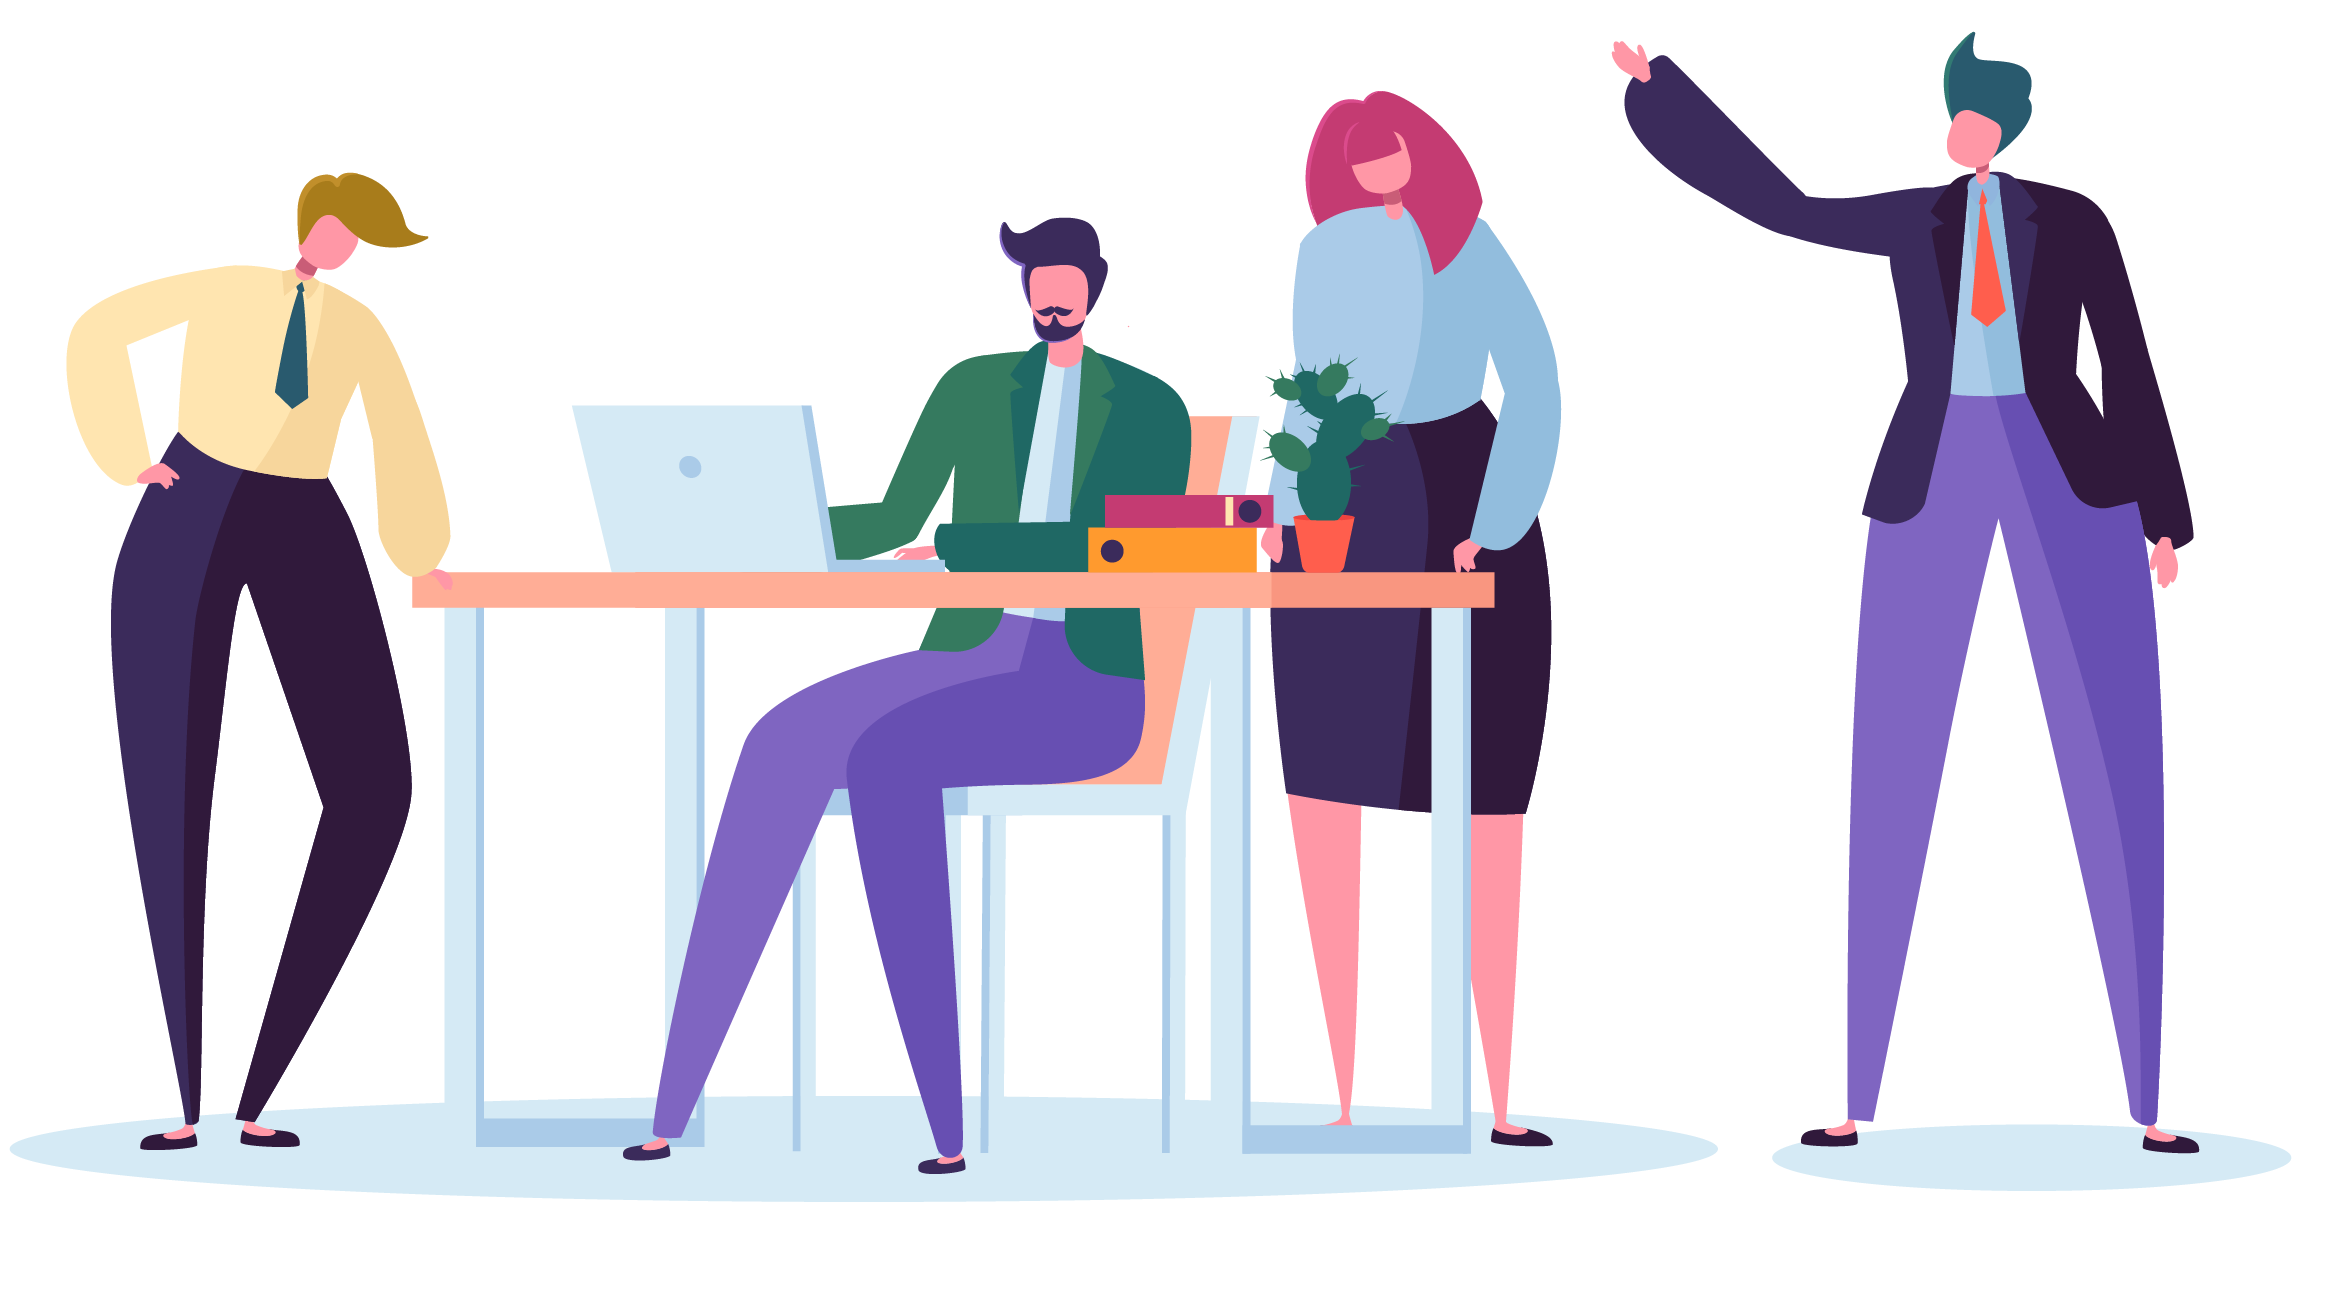 4 illustrated people stand around an office desk working together.